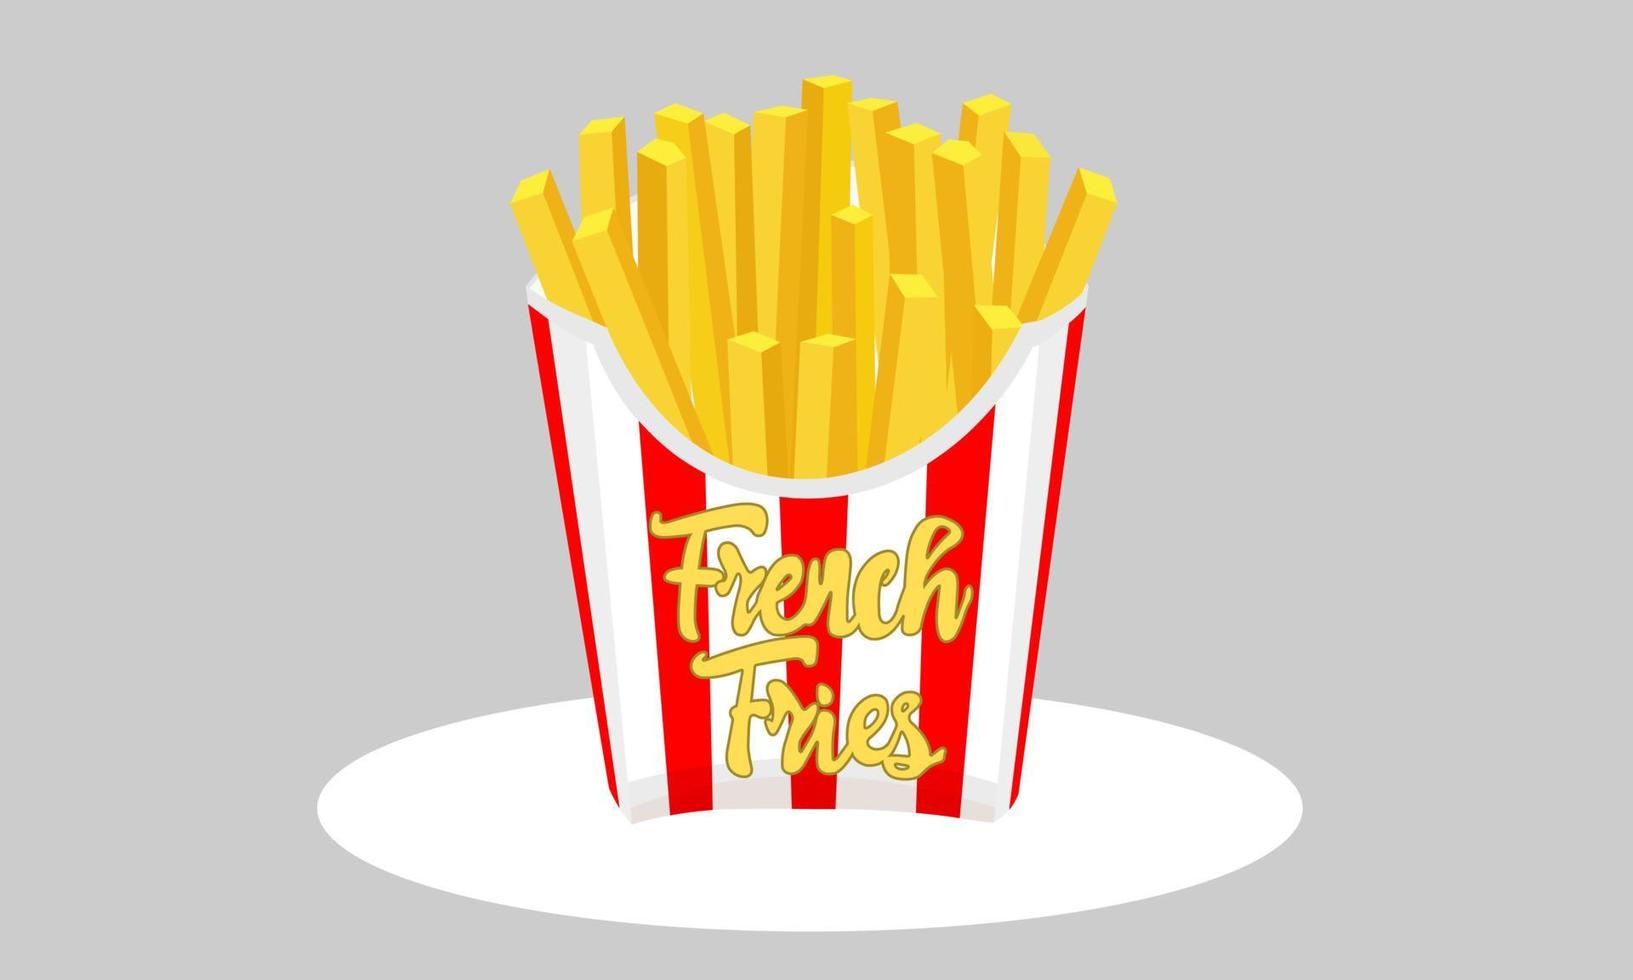 Large french fries fast food. Potato chips in red and white striped paper box. French fries packaging box flat design. vector